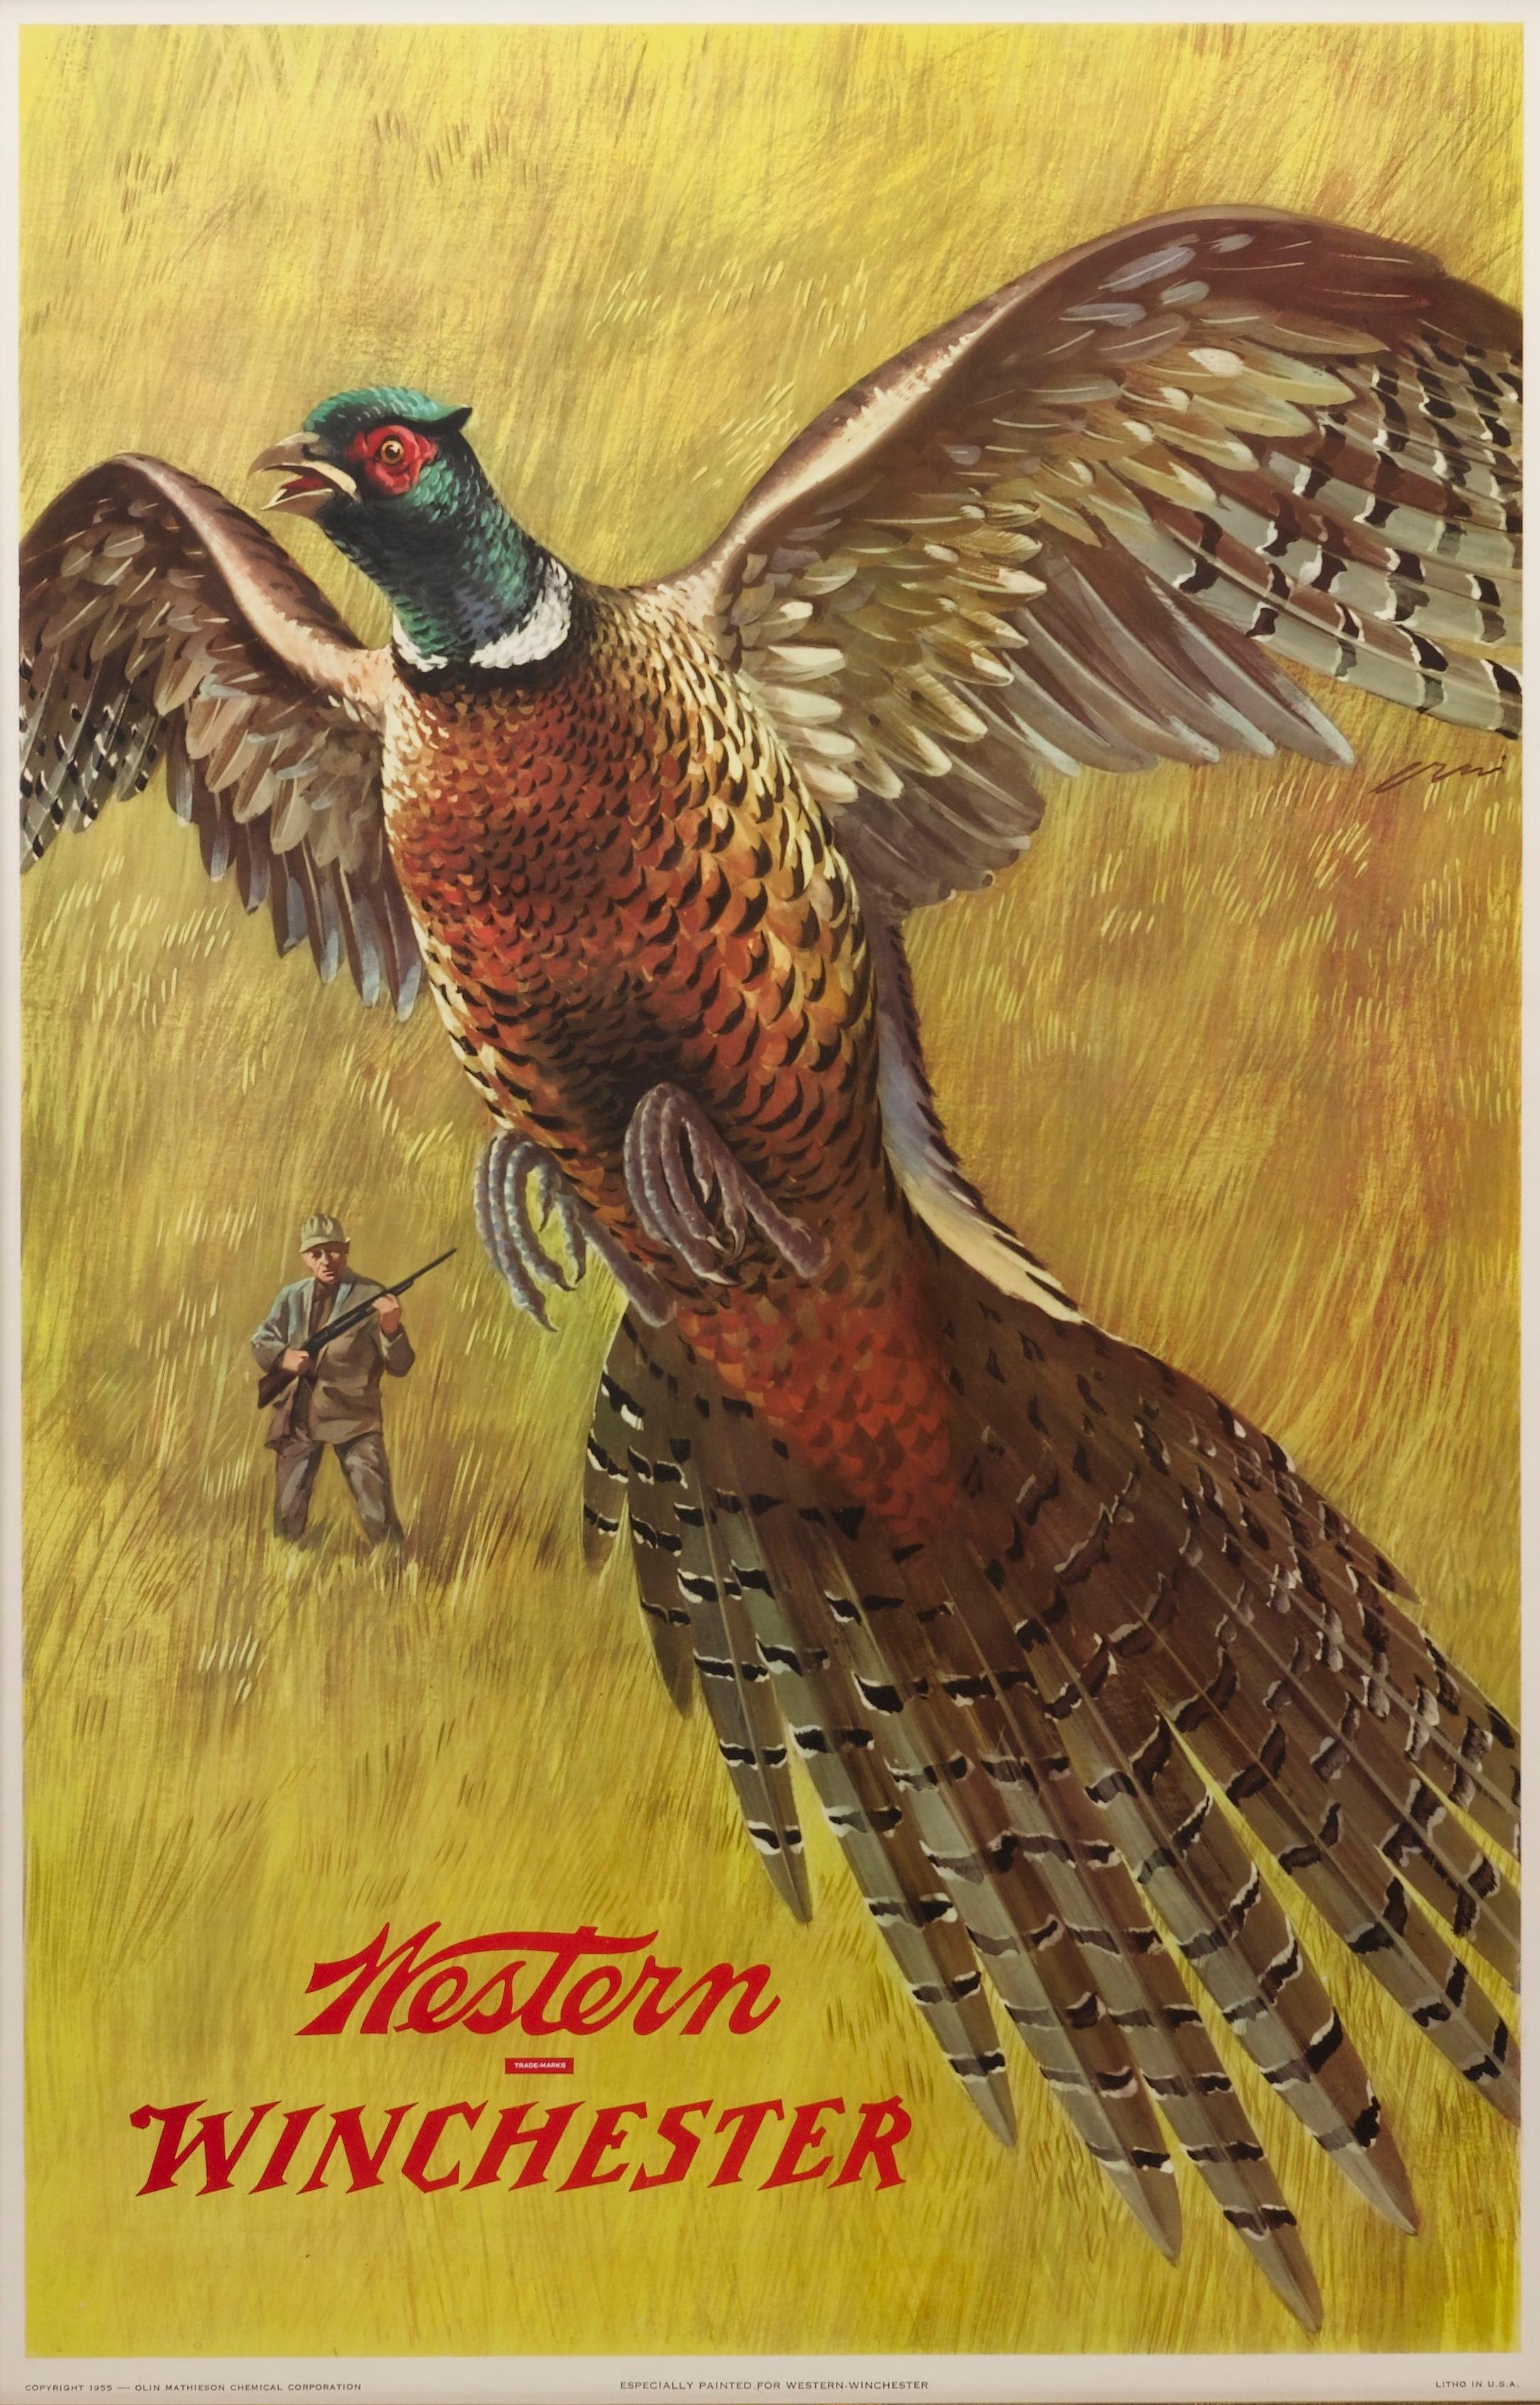 This vintage poster was made to advertise Winchester rifles by displaying game in its natural habitat, in this case a pheasant. The poster has a dramatic flying spread-wing pheasant in the foreground, with a lone hunter in the background. Both the